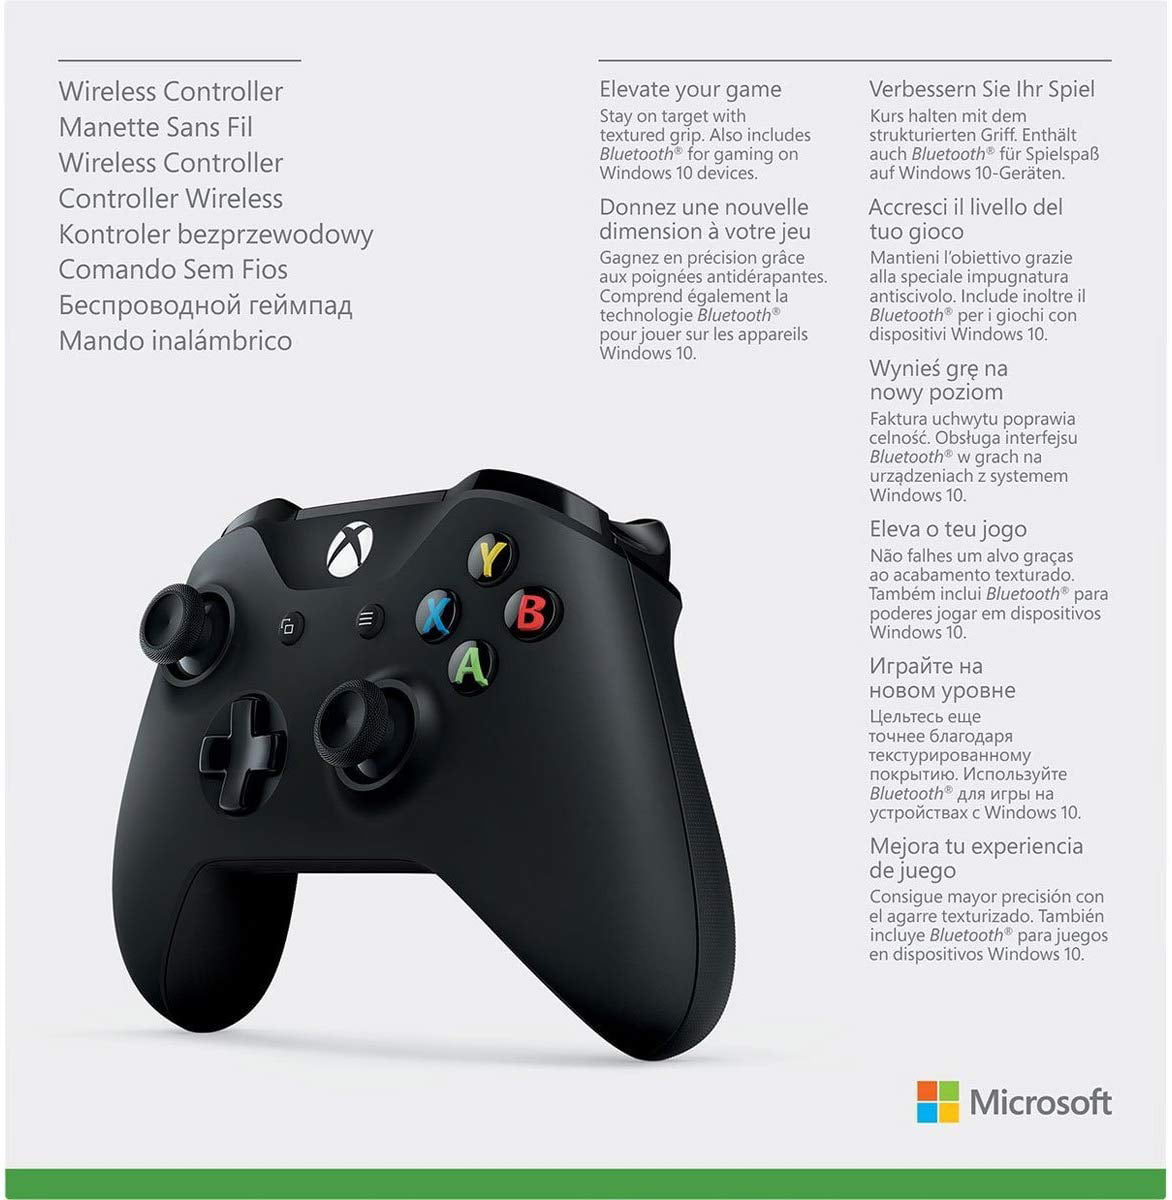 Xbox Series Xs Wireless Controller - Carbon Black : Target